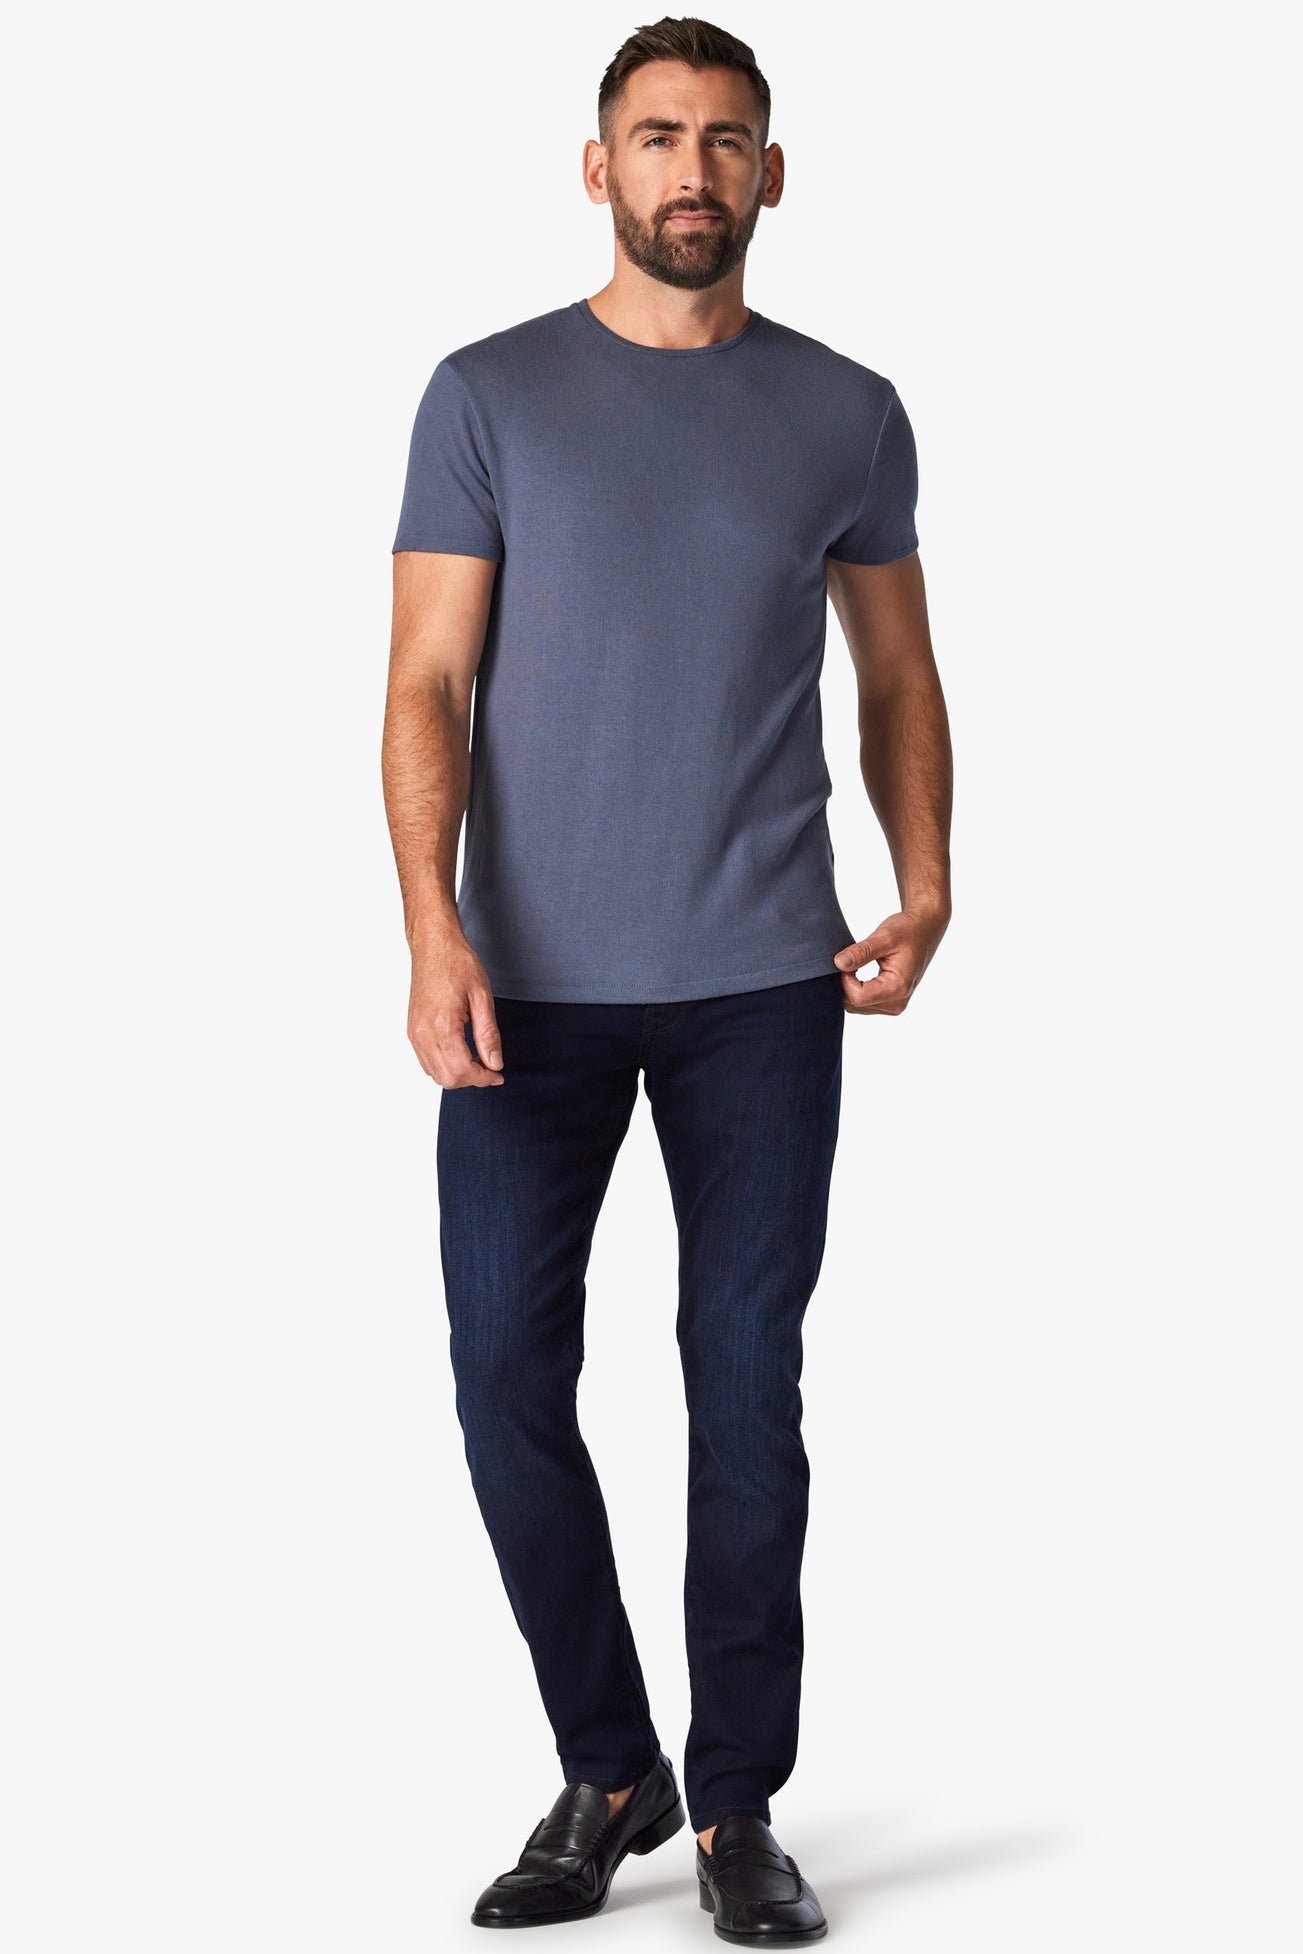 A classic, straight-leg jean in a high-rise fit. Stretchy, premium fabric with a dark, clean wash. Luxury, comfort, sophistication and style that can transition from day to night when paired with a classic sports coat.Designed For Comfort A classic, straight-leg jean in a high-rise fit. Stretchy, premium fabric with a dark, clean wash. Luxury, comfort, sophistication and style that can transition from day to night when paired with a classic sports coat.